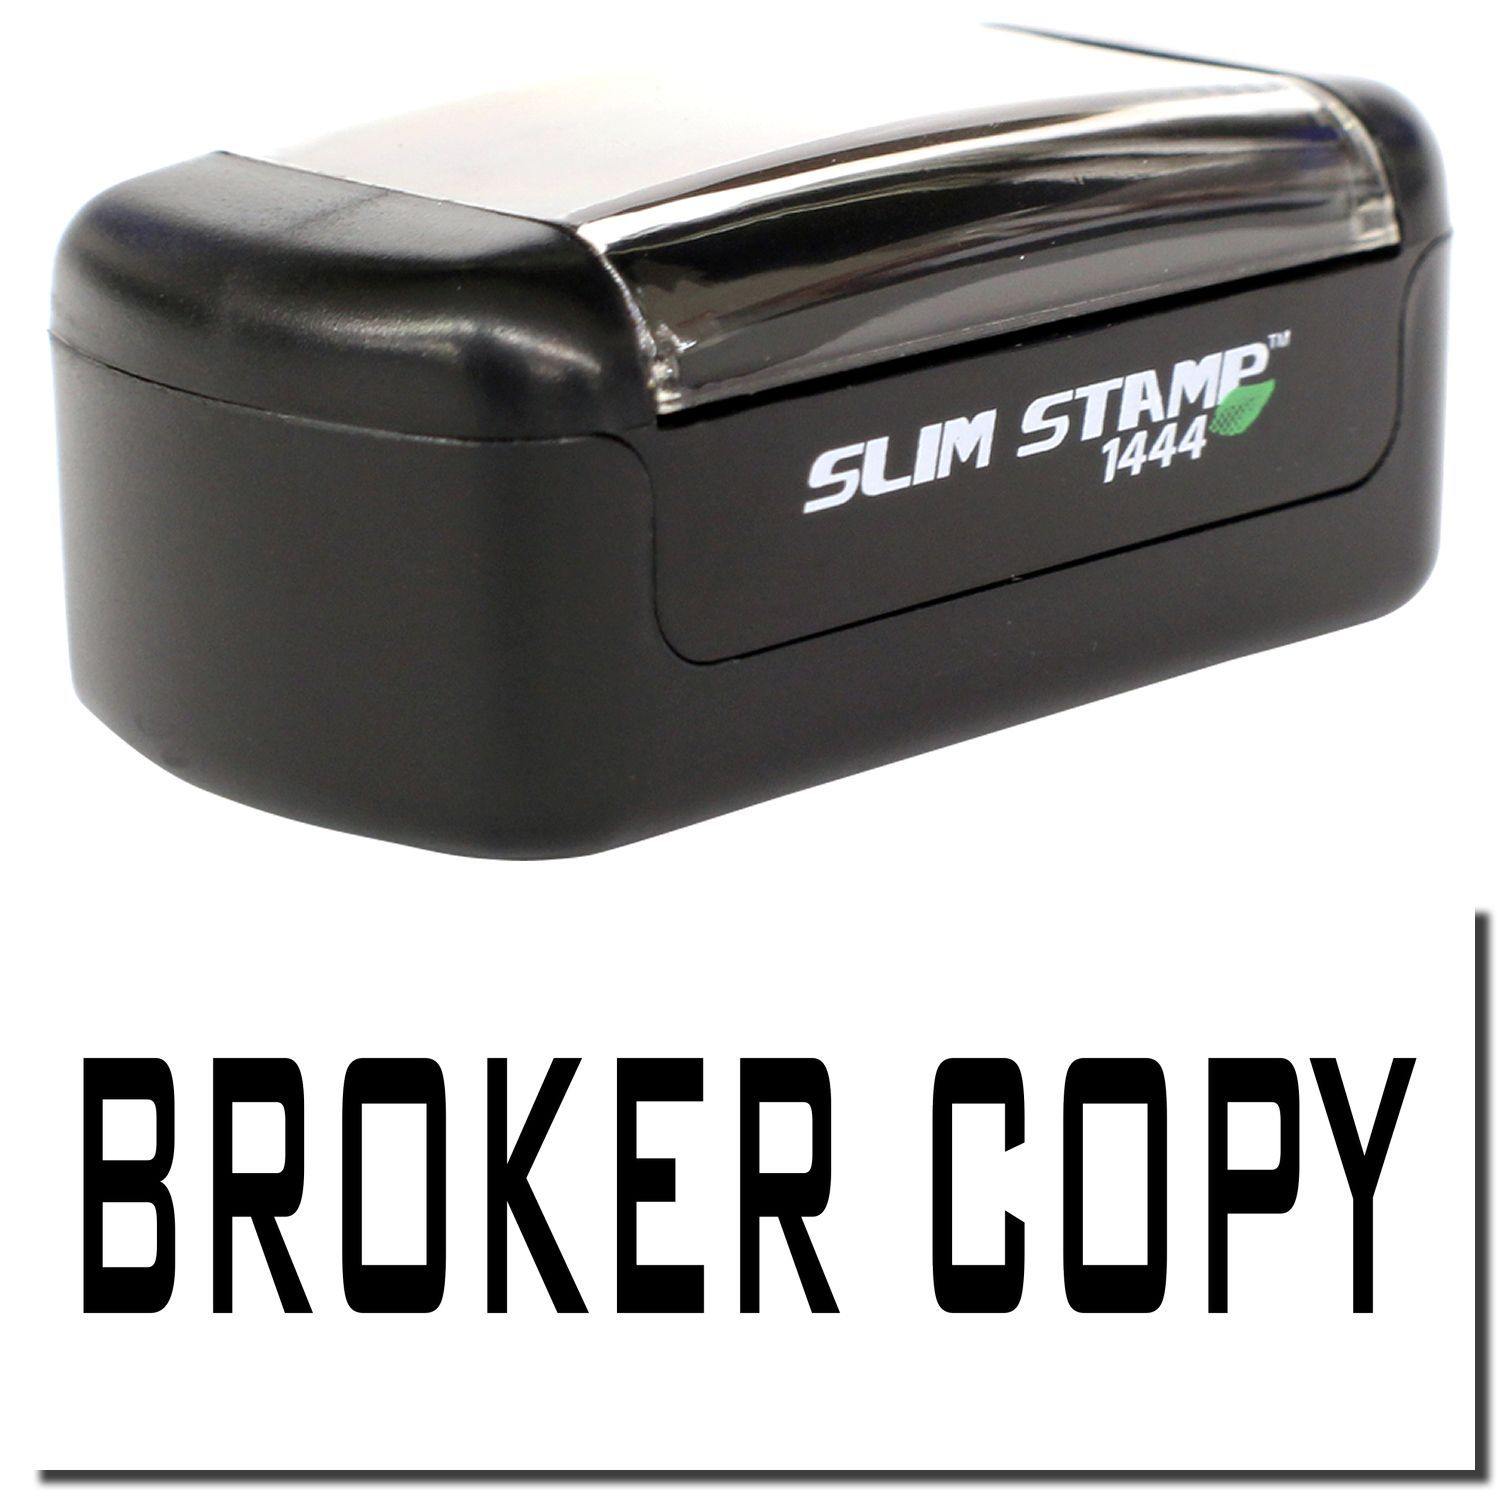 A stock office pre-inked stamp with a stamped image showing how the text "BROKER COPY" is displayed after stamping.